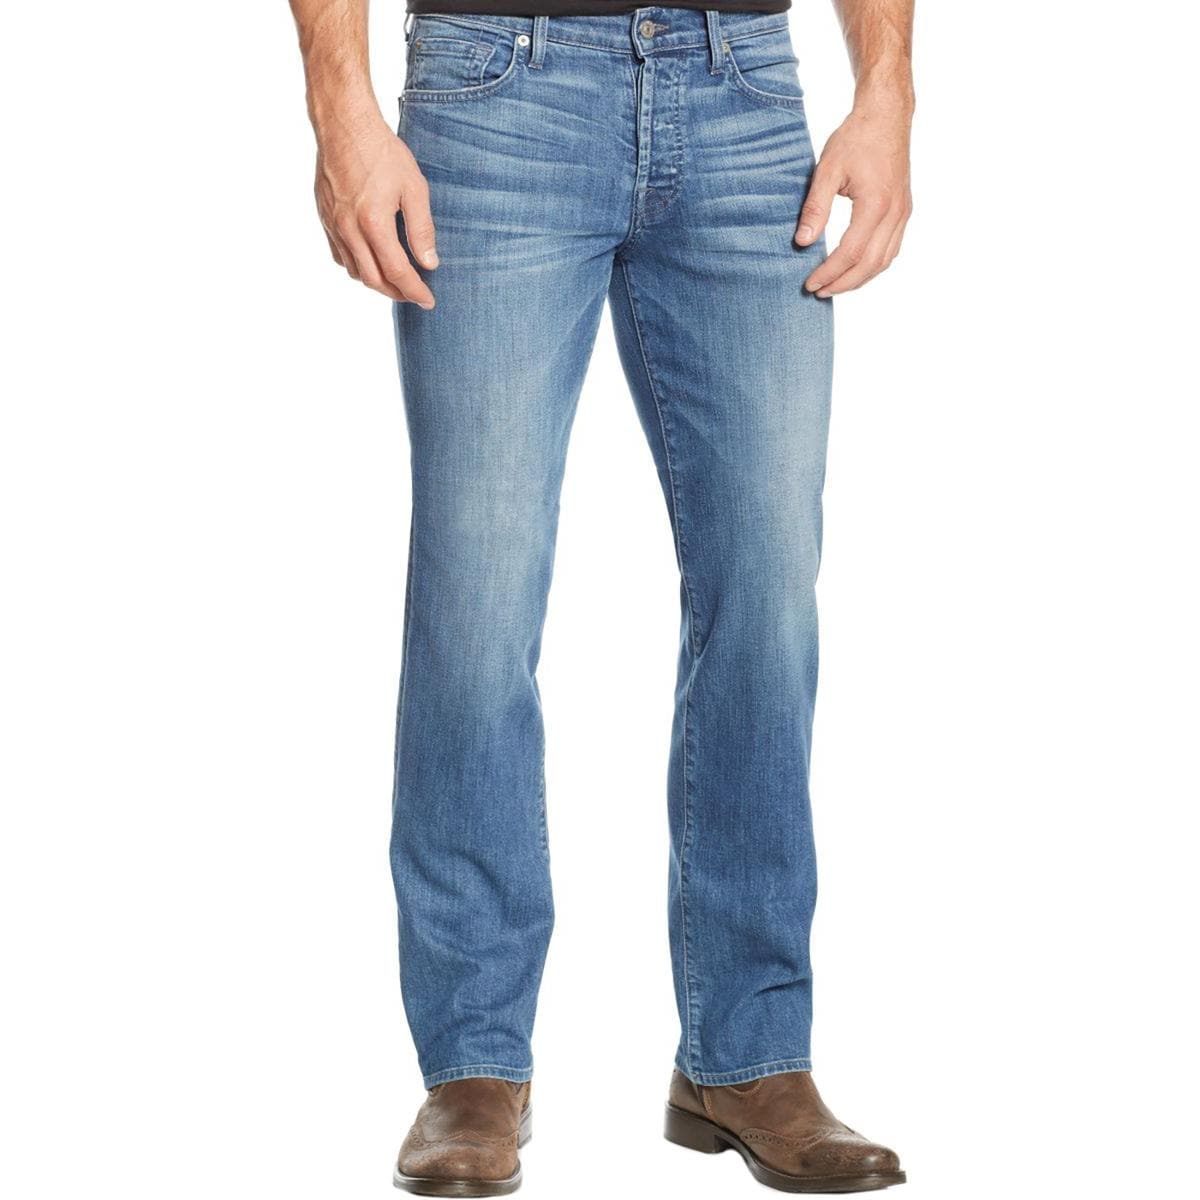 7 mankind jeans mens